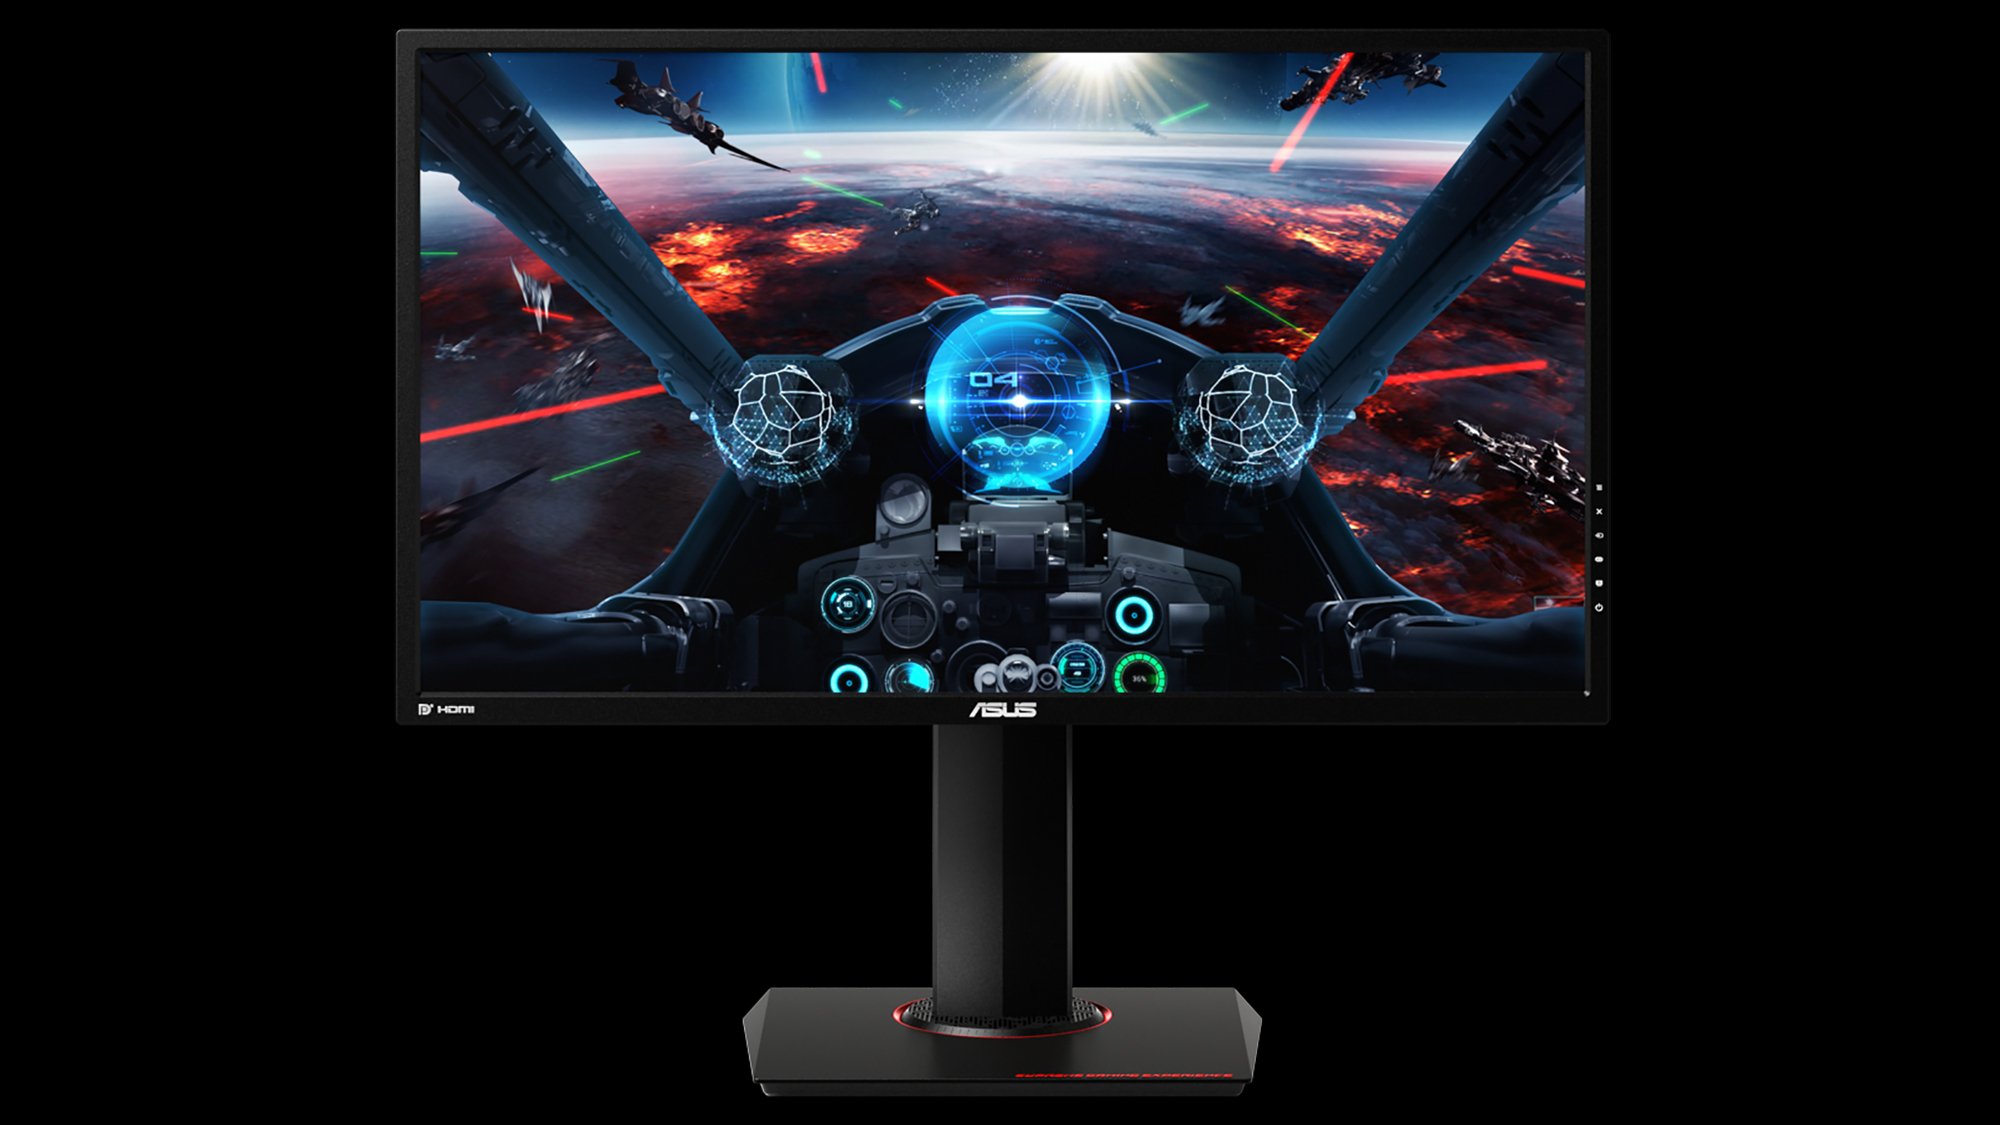 Asus announces three new gaming monitors with GameVisual technology